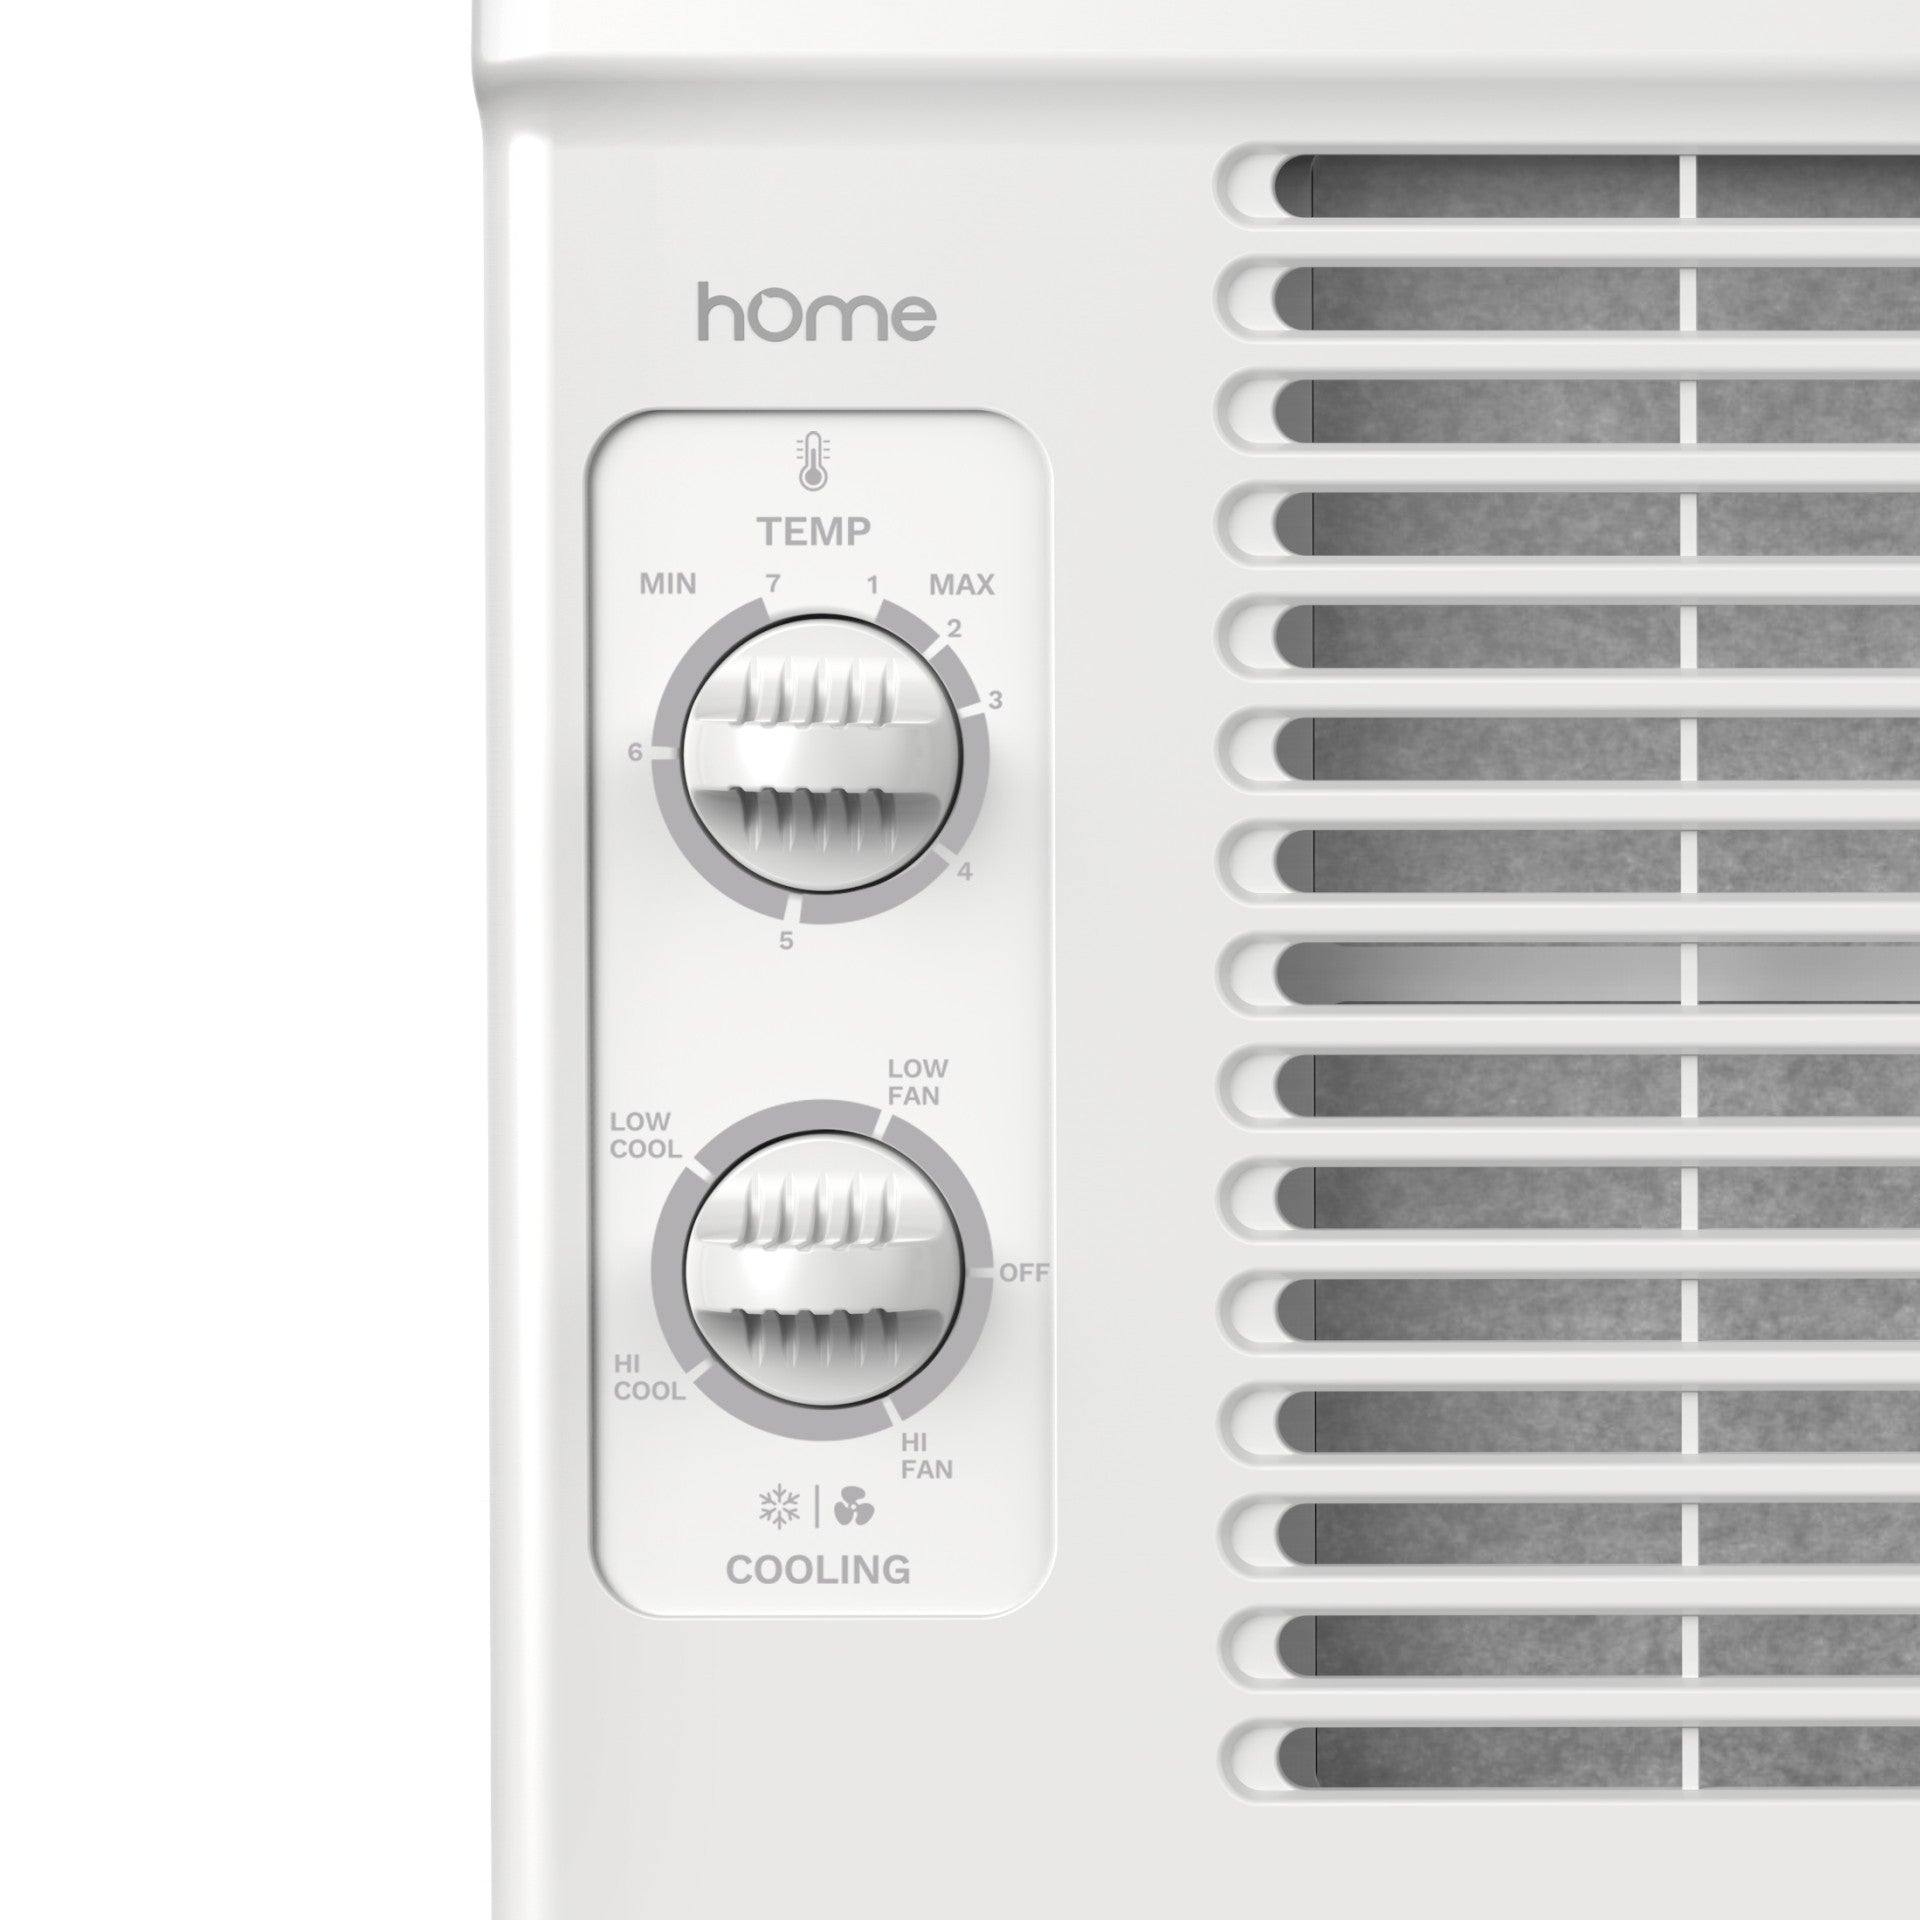 Temperature changer feature in window air conditioner 